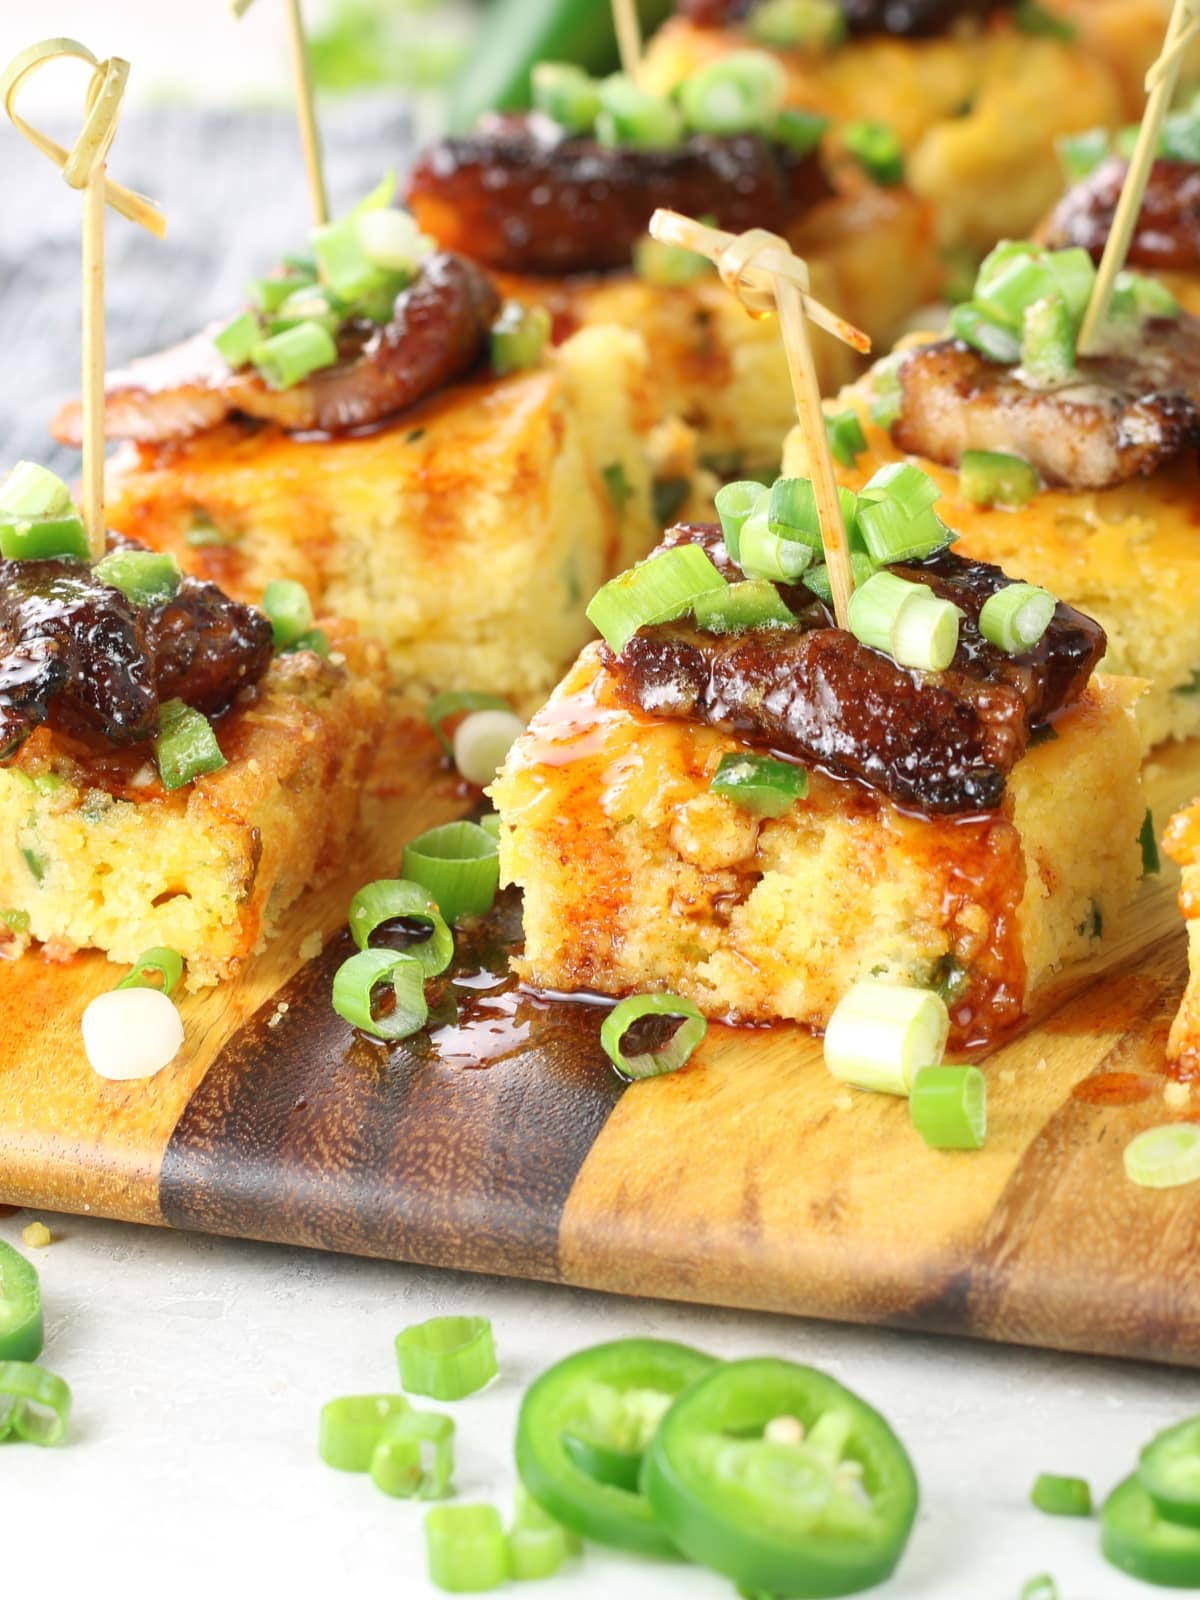 Delicious Crispy Pork Belly with Jalapeño Cheddar Cornbread and Hot Honey.